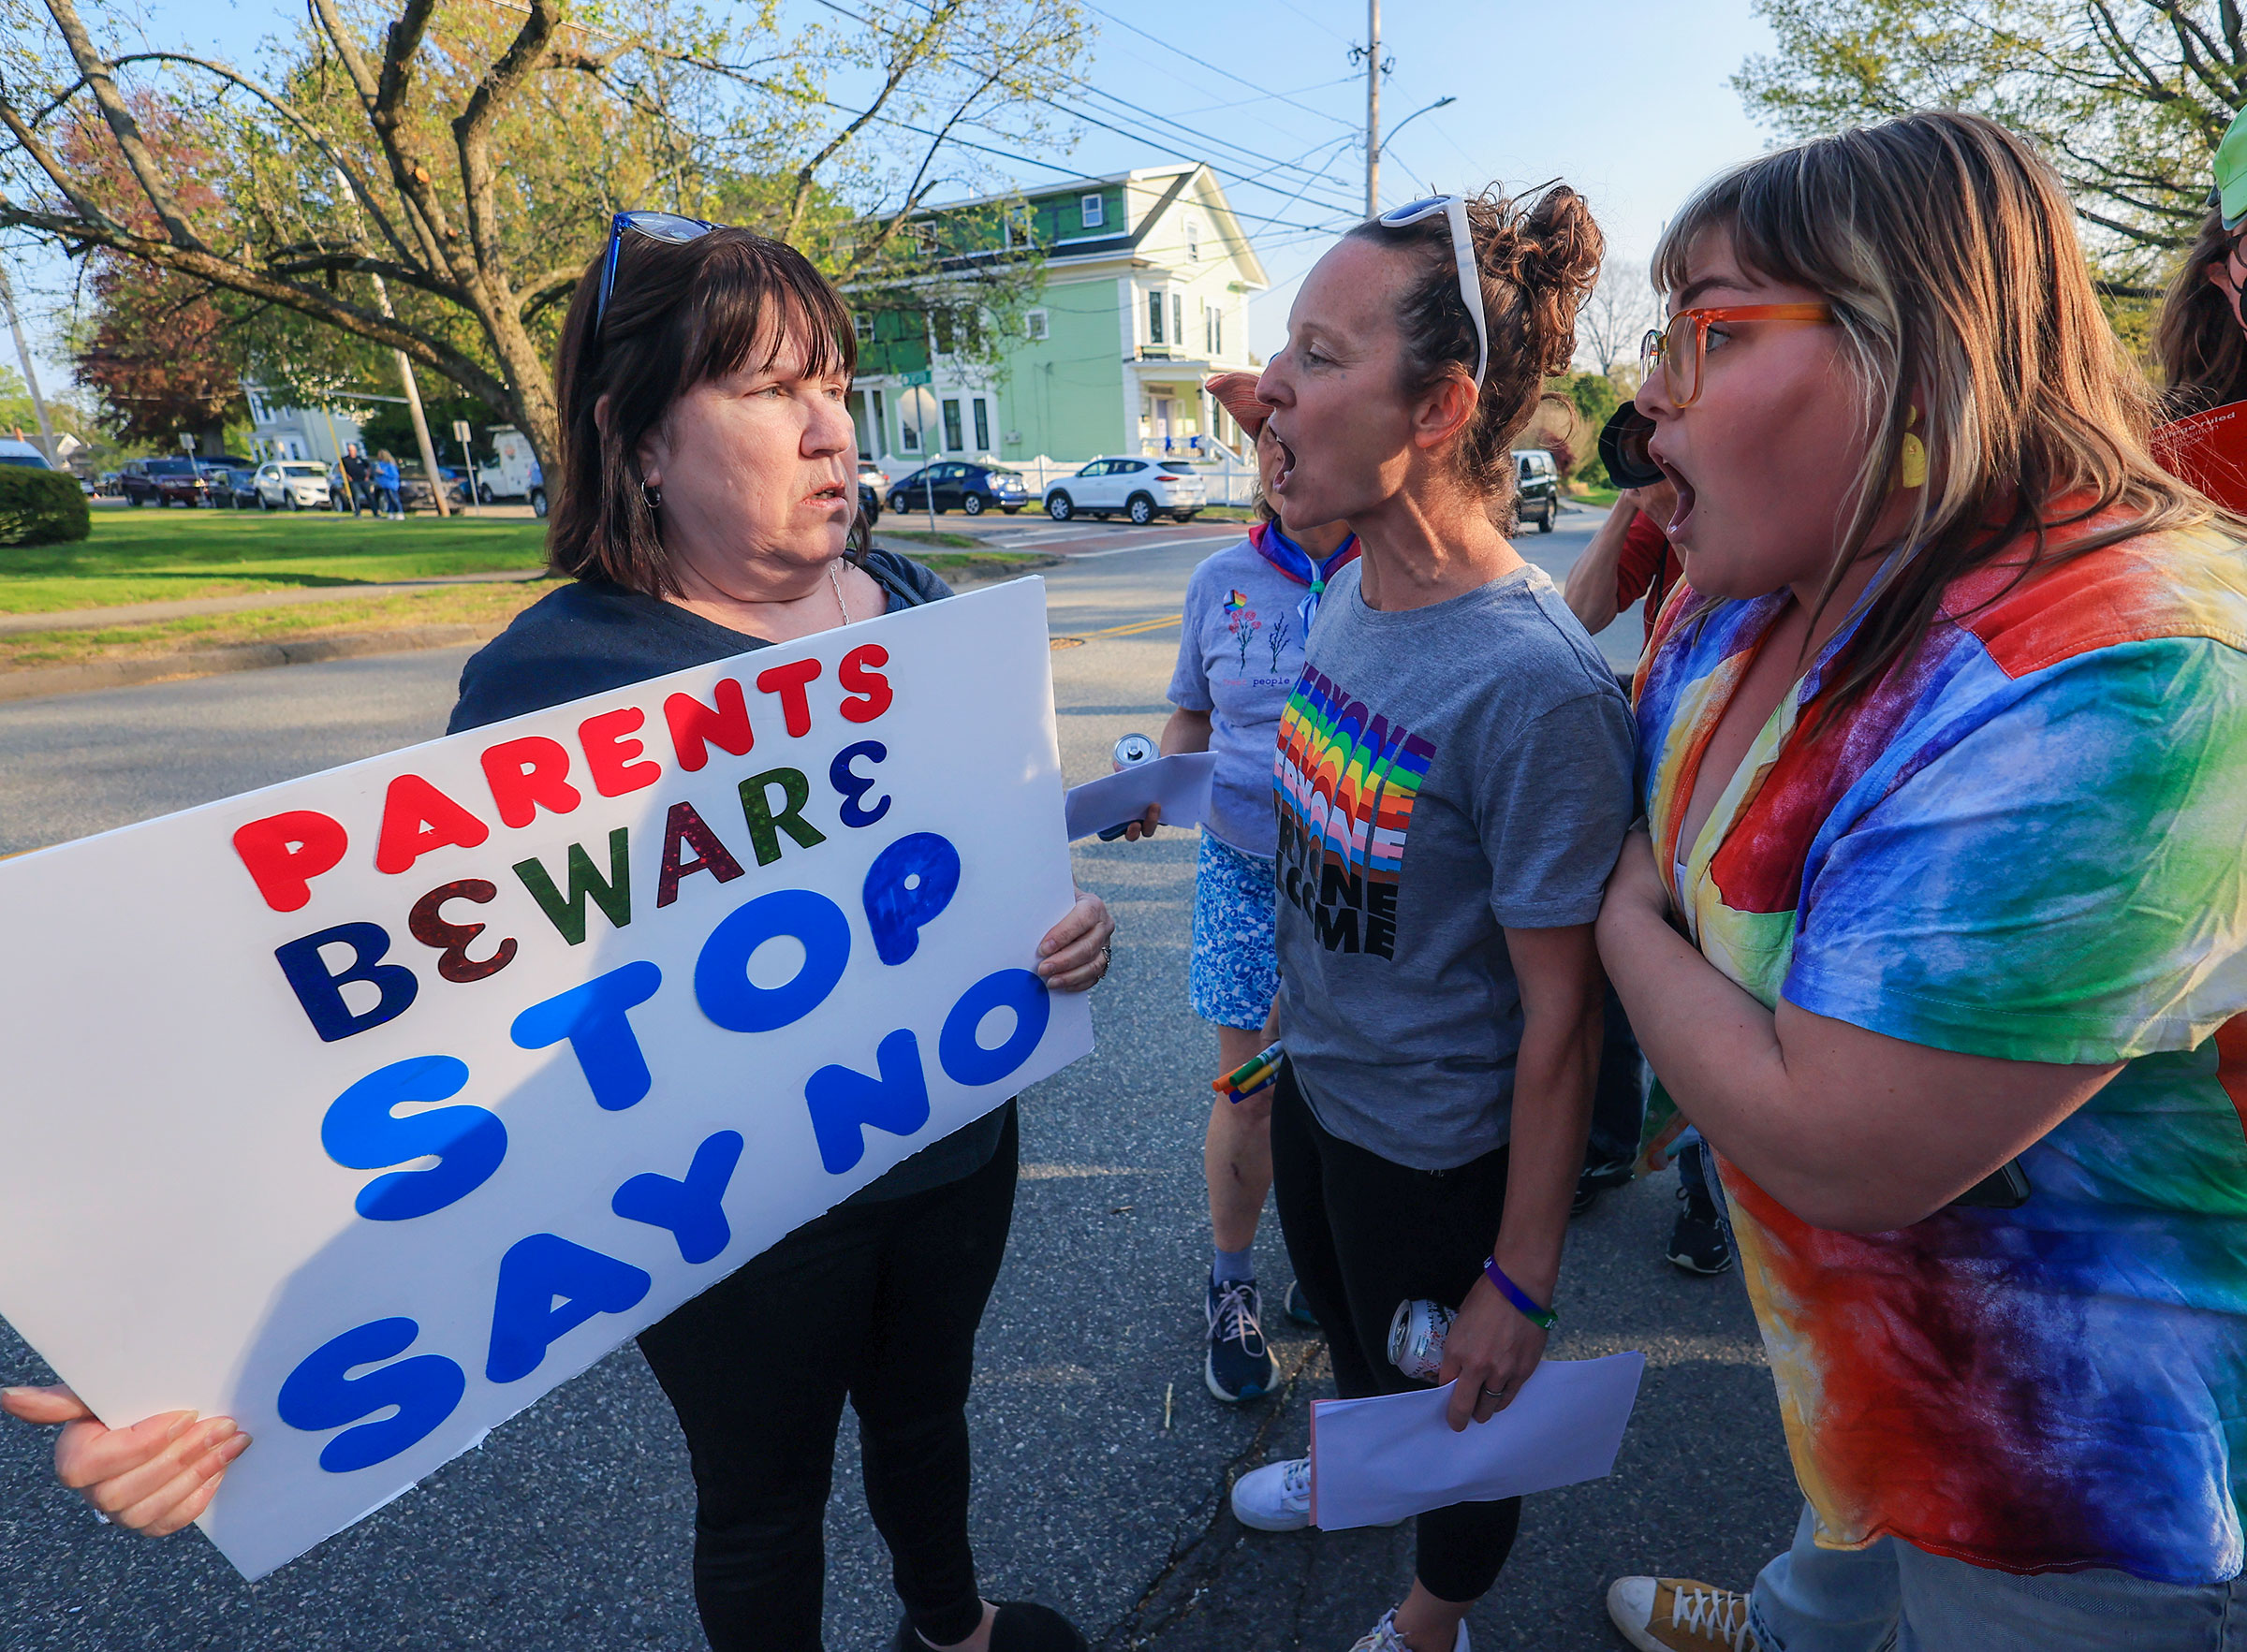 Two lgbtq+ allies speak with a woman holding a sign reading